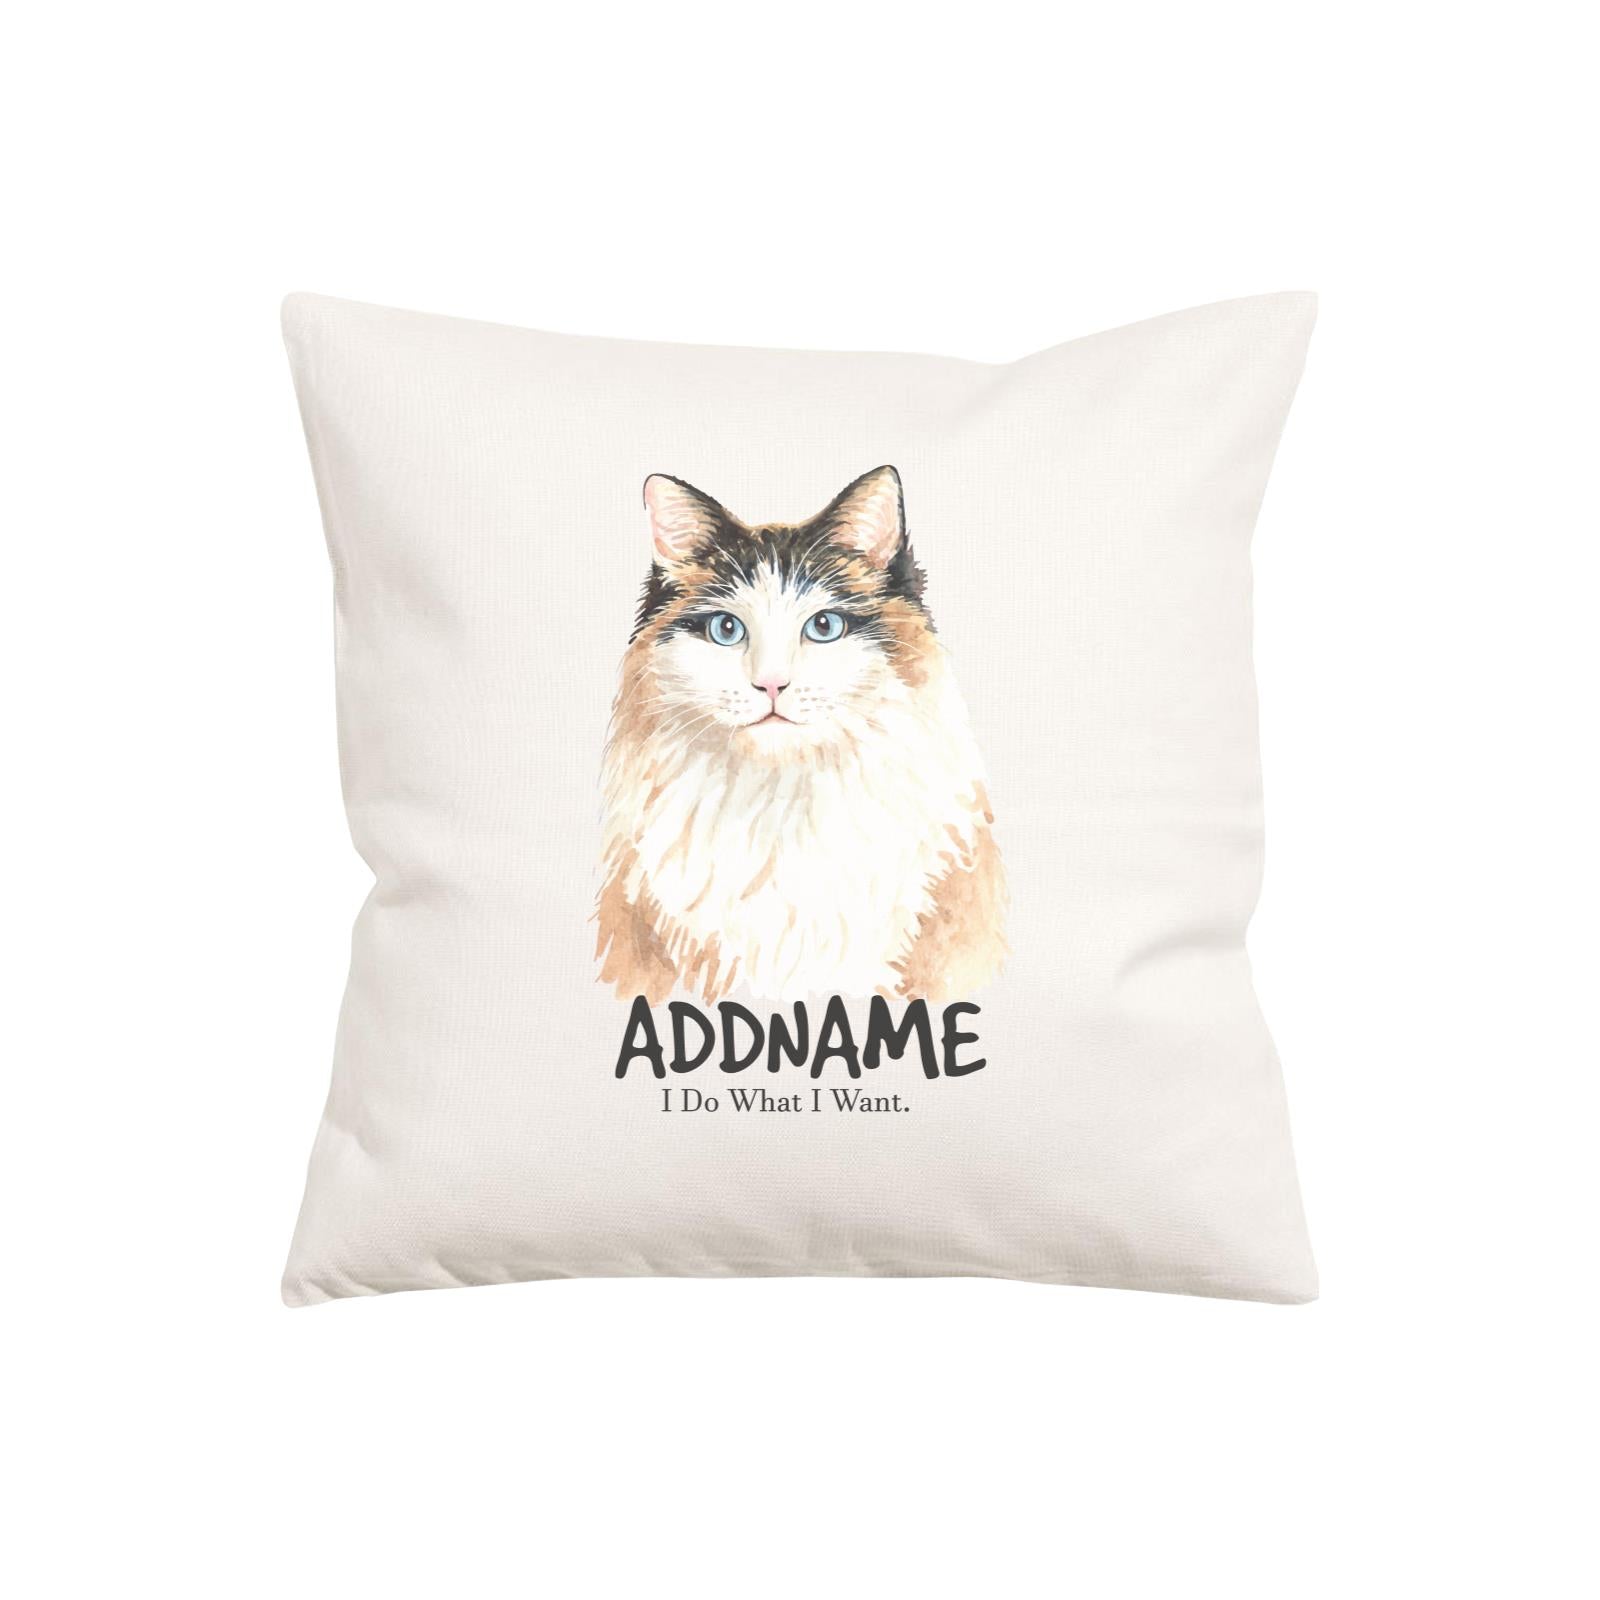 Watercolor Cat Series Long Hair Cat I Do What I Want Addname Pillow Cushion